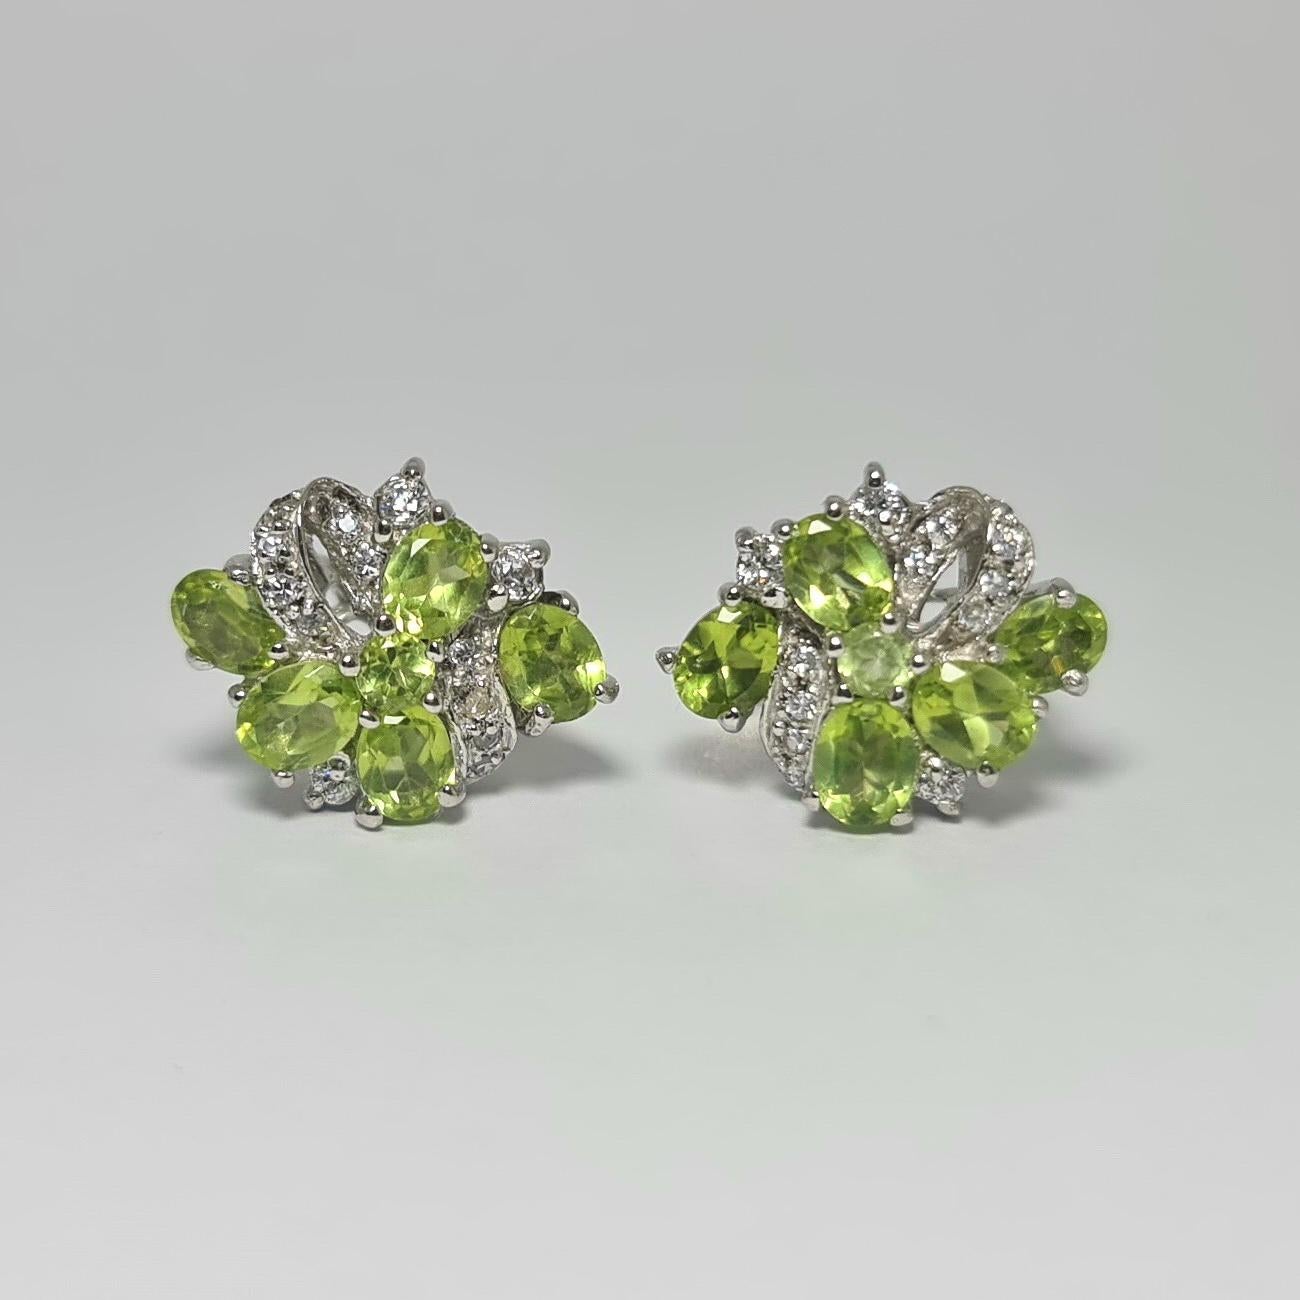 Natural Peridot and Cubic Zirconia in Pure .925 Sterling Silver Rhodium Plated Earrings ,
Please see other listings for matching ring and pendant 